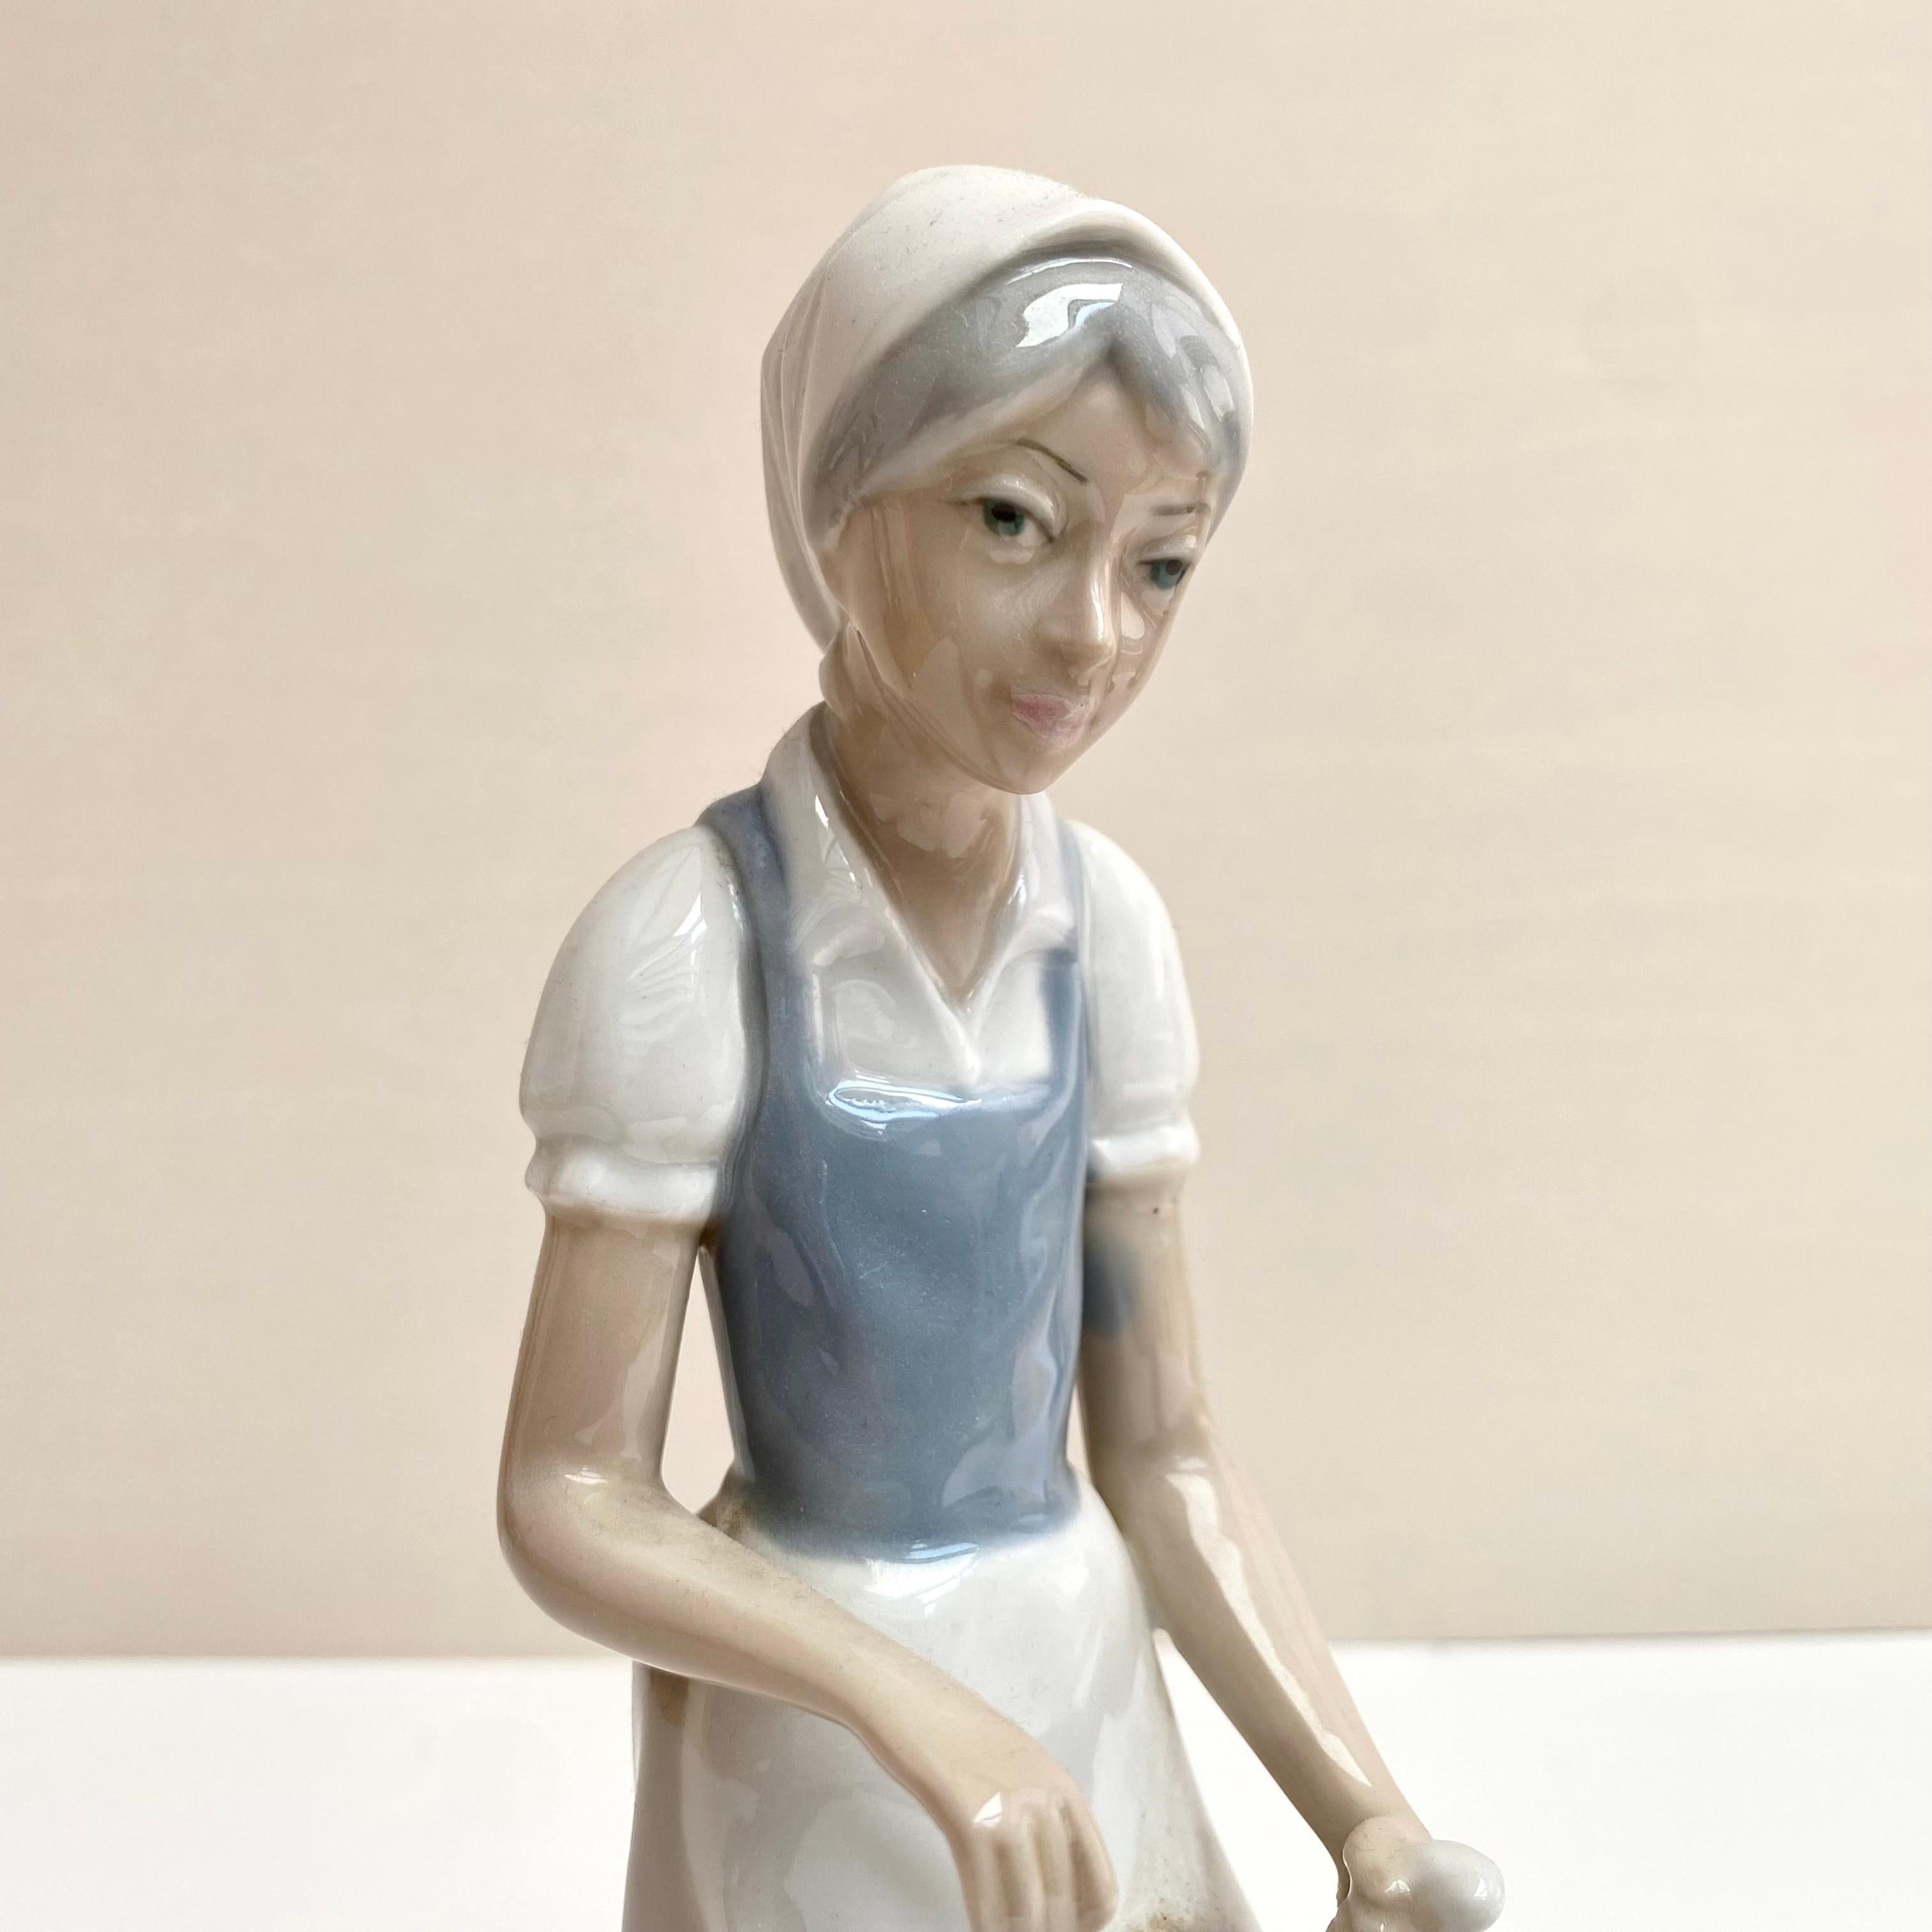 Spanish Vintage Porcelain Statuette of Peasant Girl by Casades, Spain, 1980s